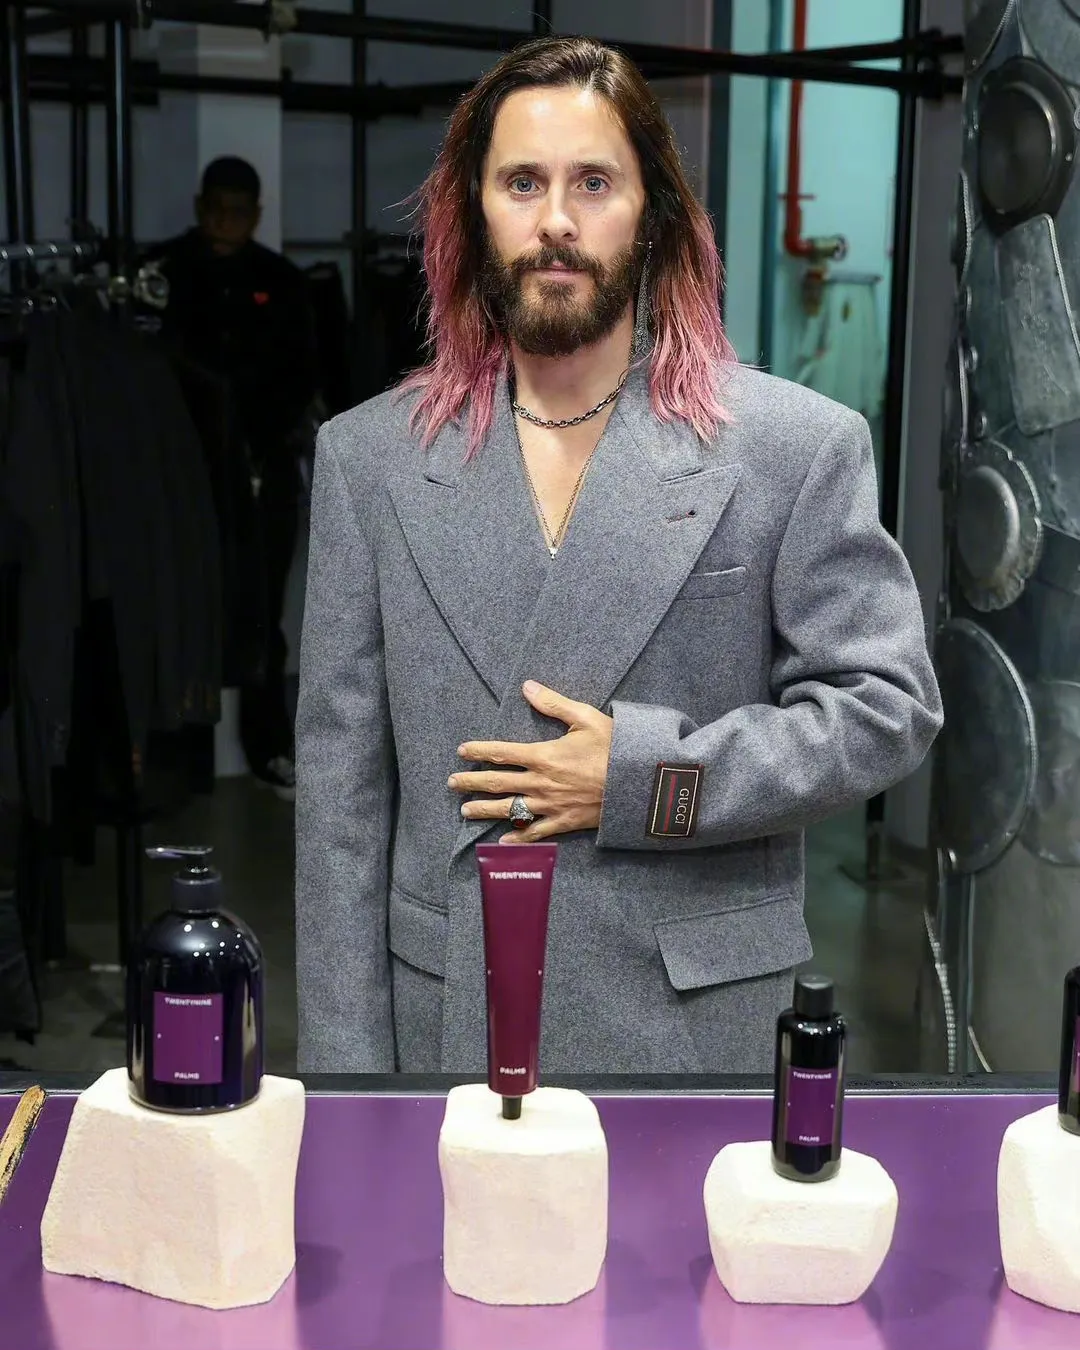 Jared Leto attends opening event for his own beauty product brand | FMV6